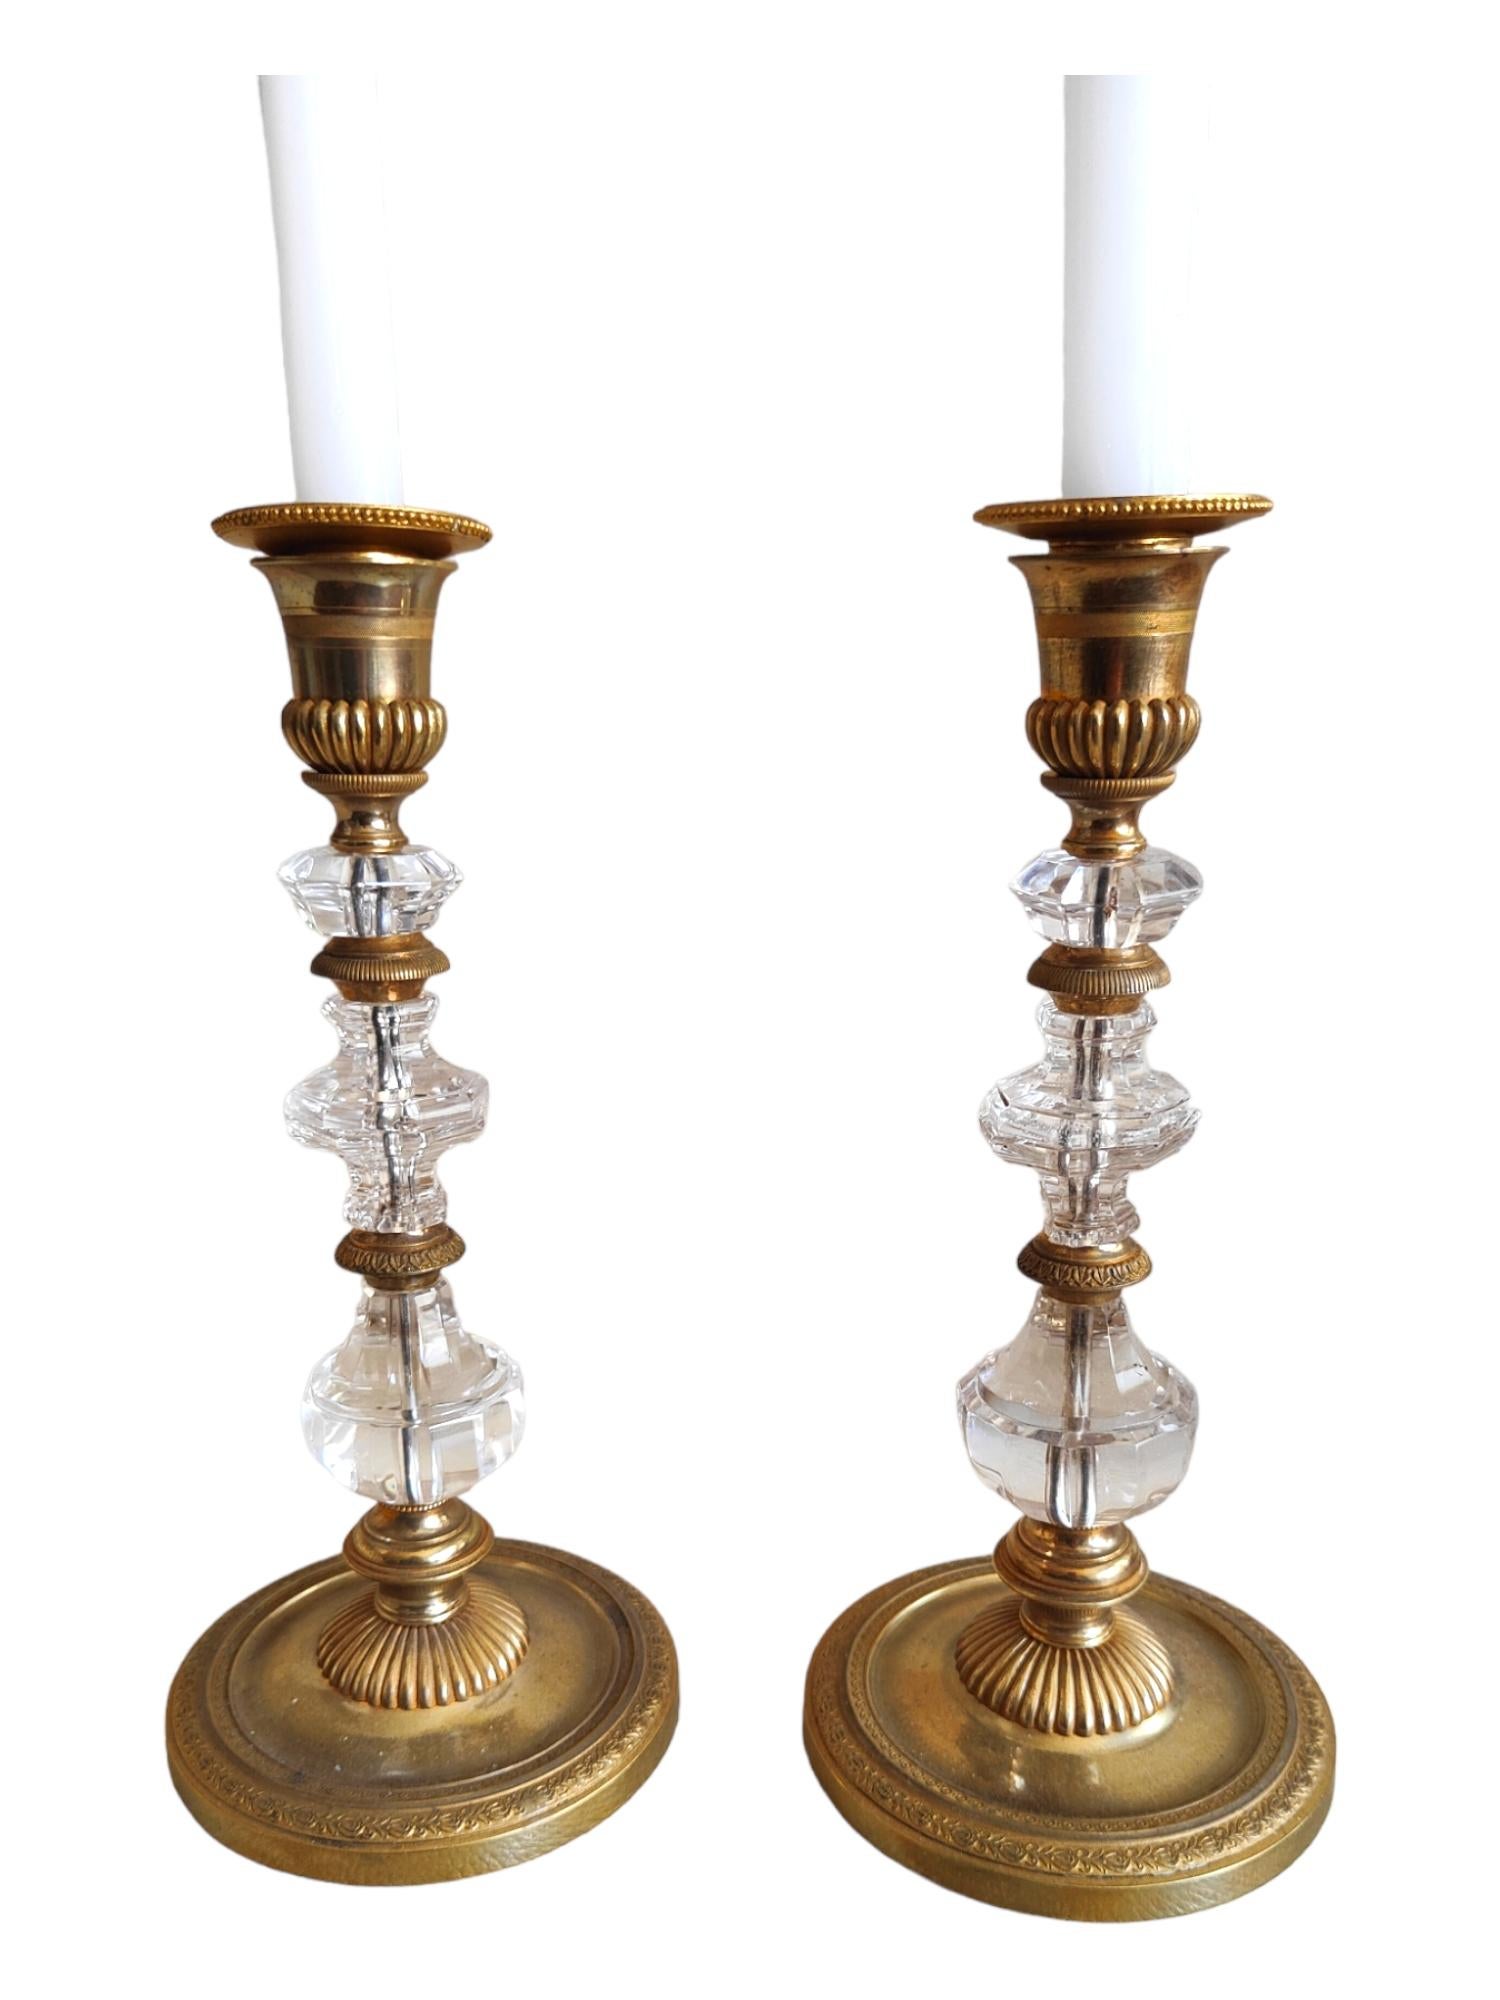 Pair of Quartz Candlesticks 'Rock Crystal, 19th Century' For Sale 6